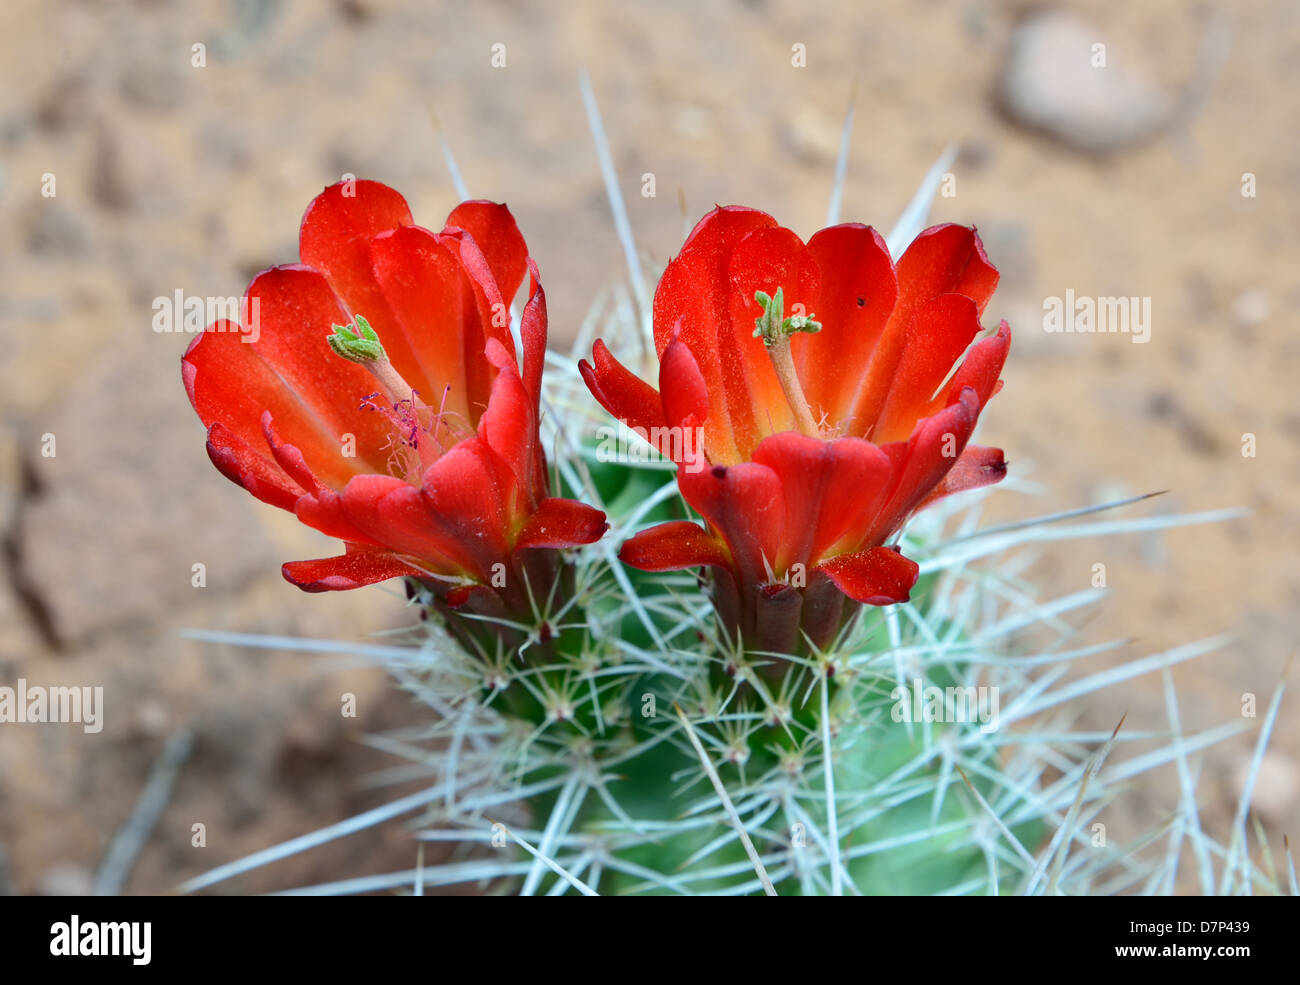 Red cactus flowers. Arches National Park, Moab, Utah, USA. Stock Photo